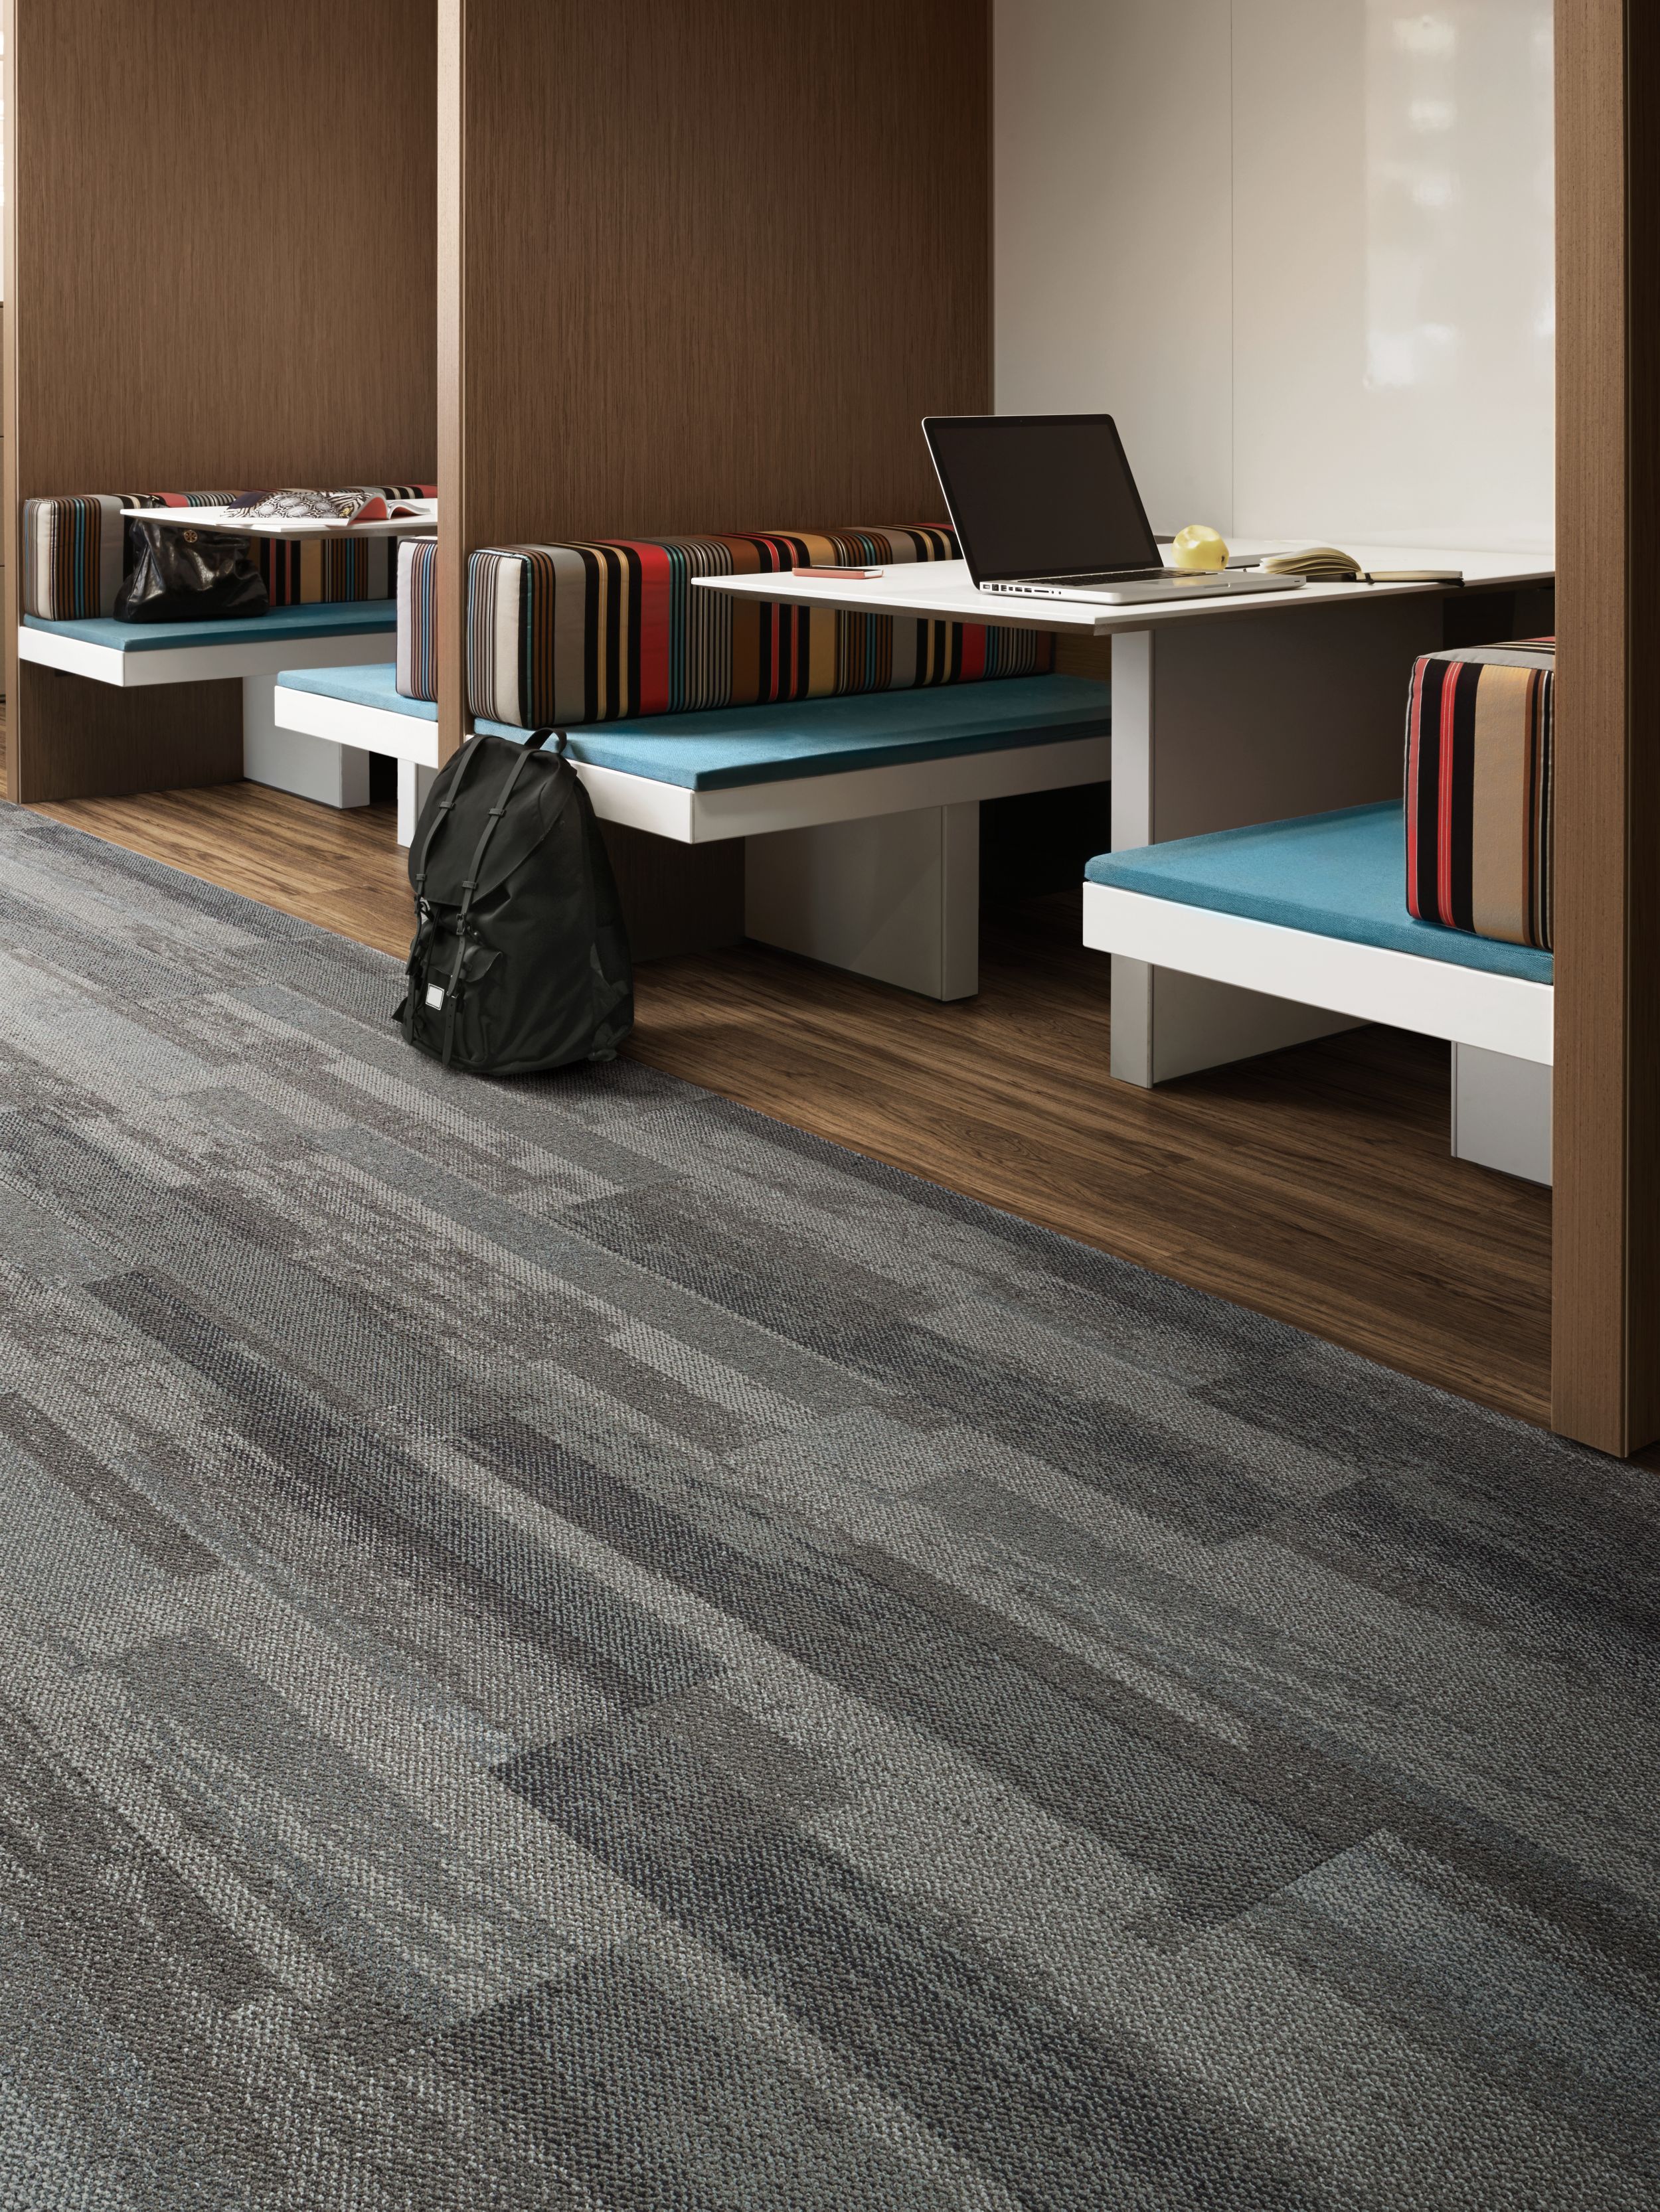 Interface Naturally Weathered plank carpet tile and Natural Woodgrains LVT in office with laptop and backpack in booth seating numéro d’image 6